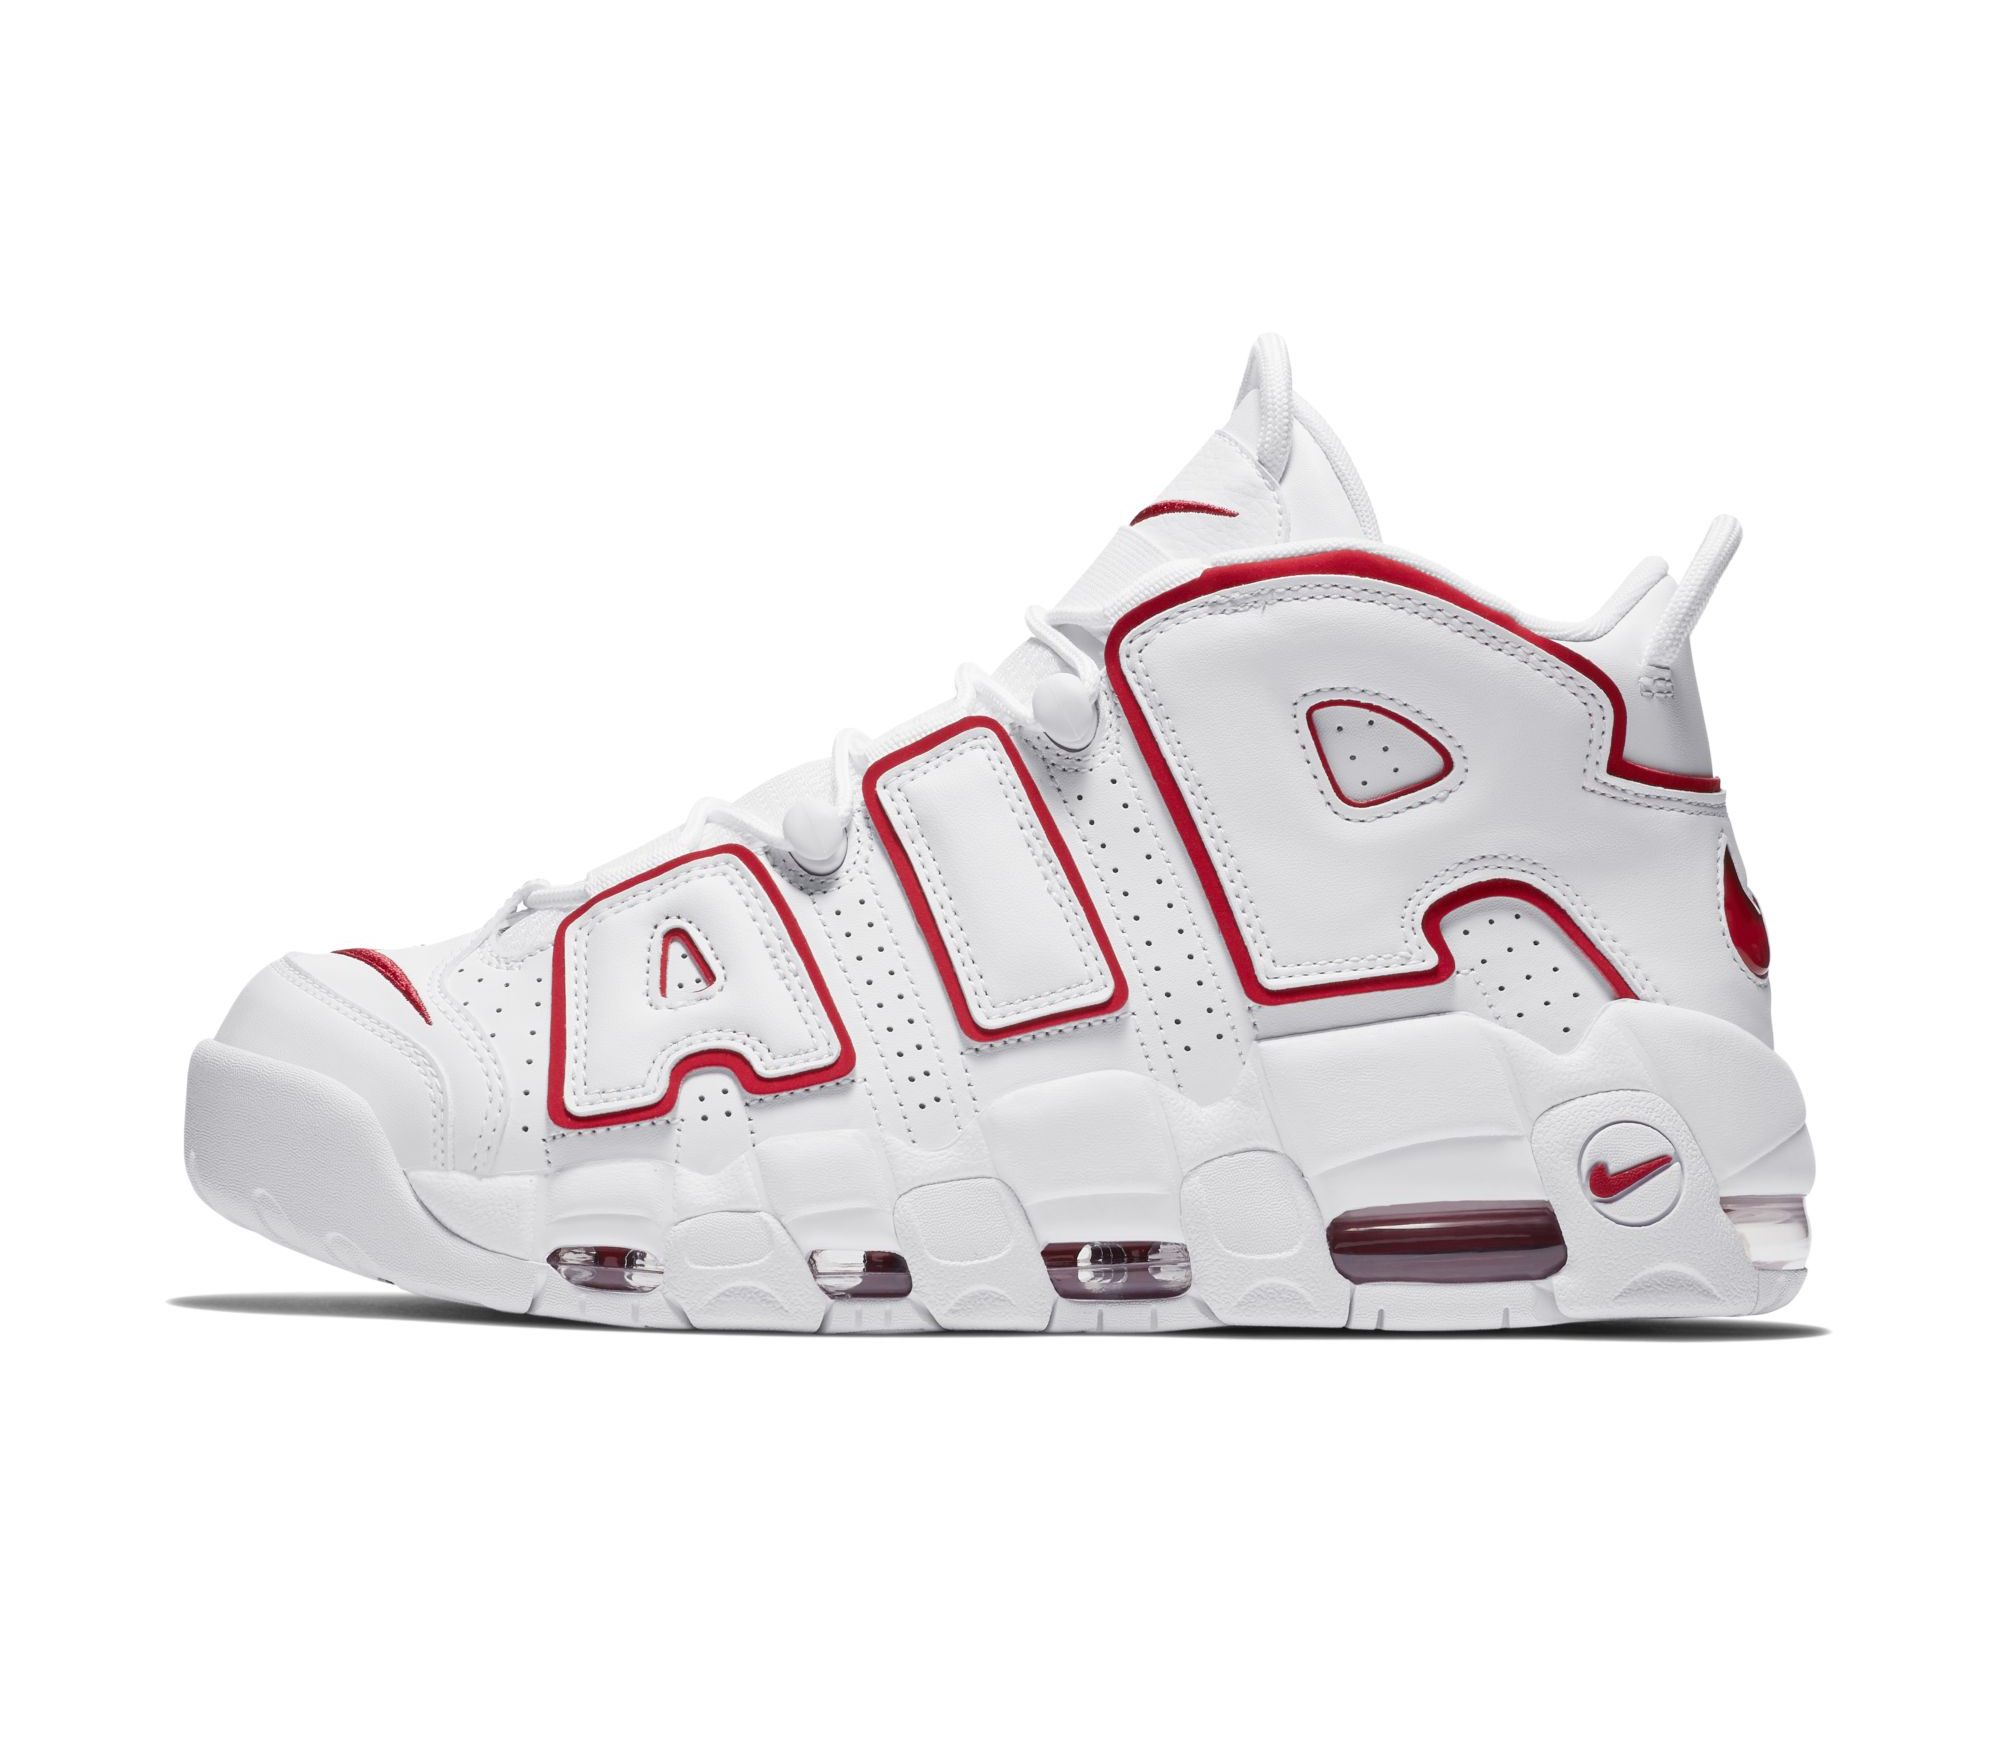 Nike Air More Uptempo 'White on White'  Detailed Look and Review -  WearTesters